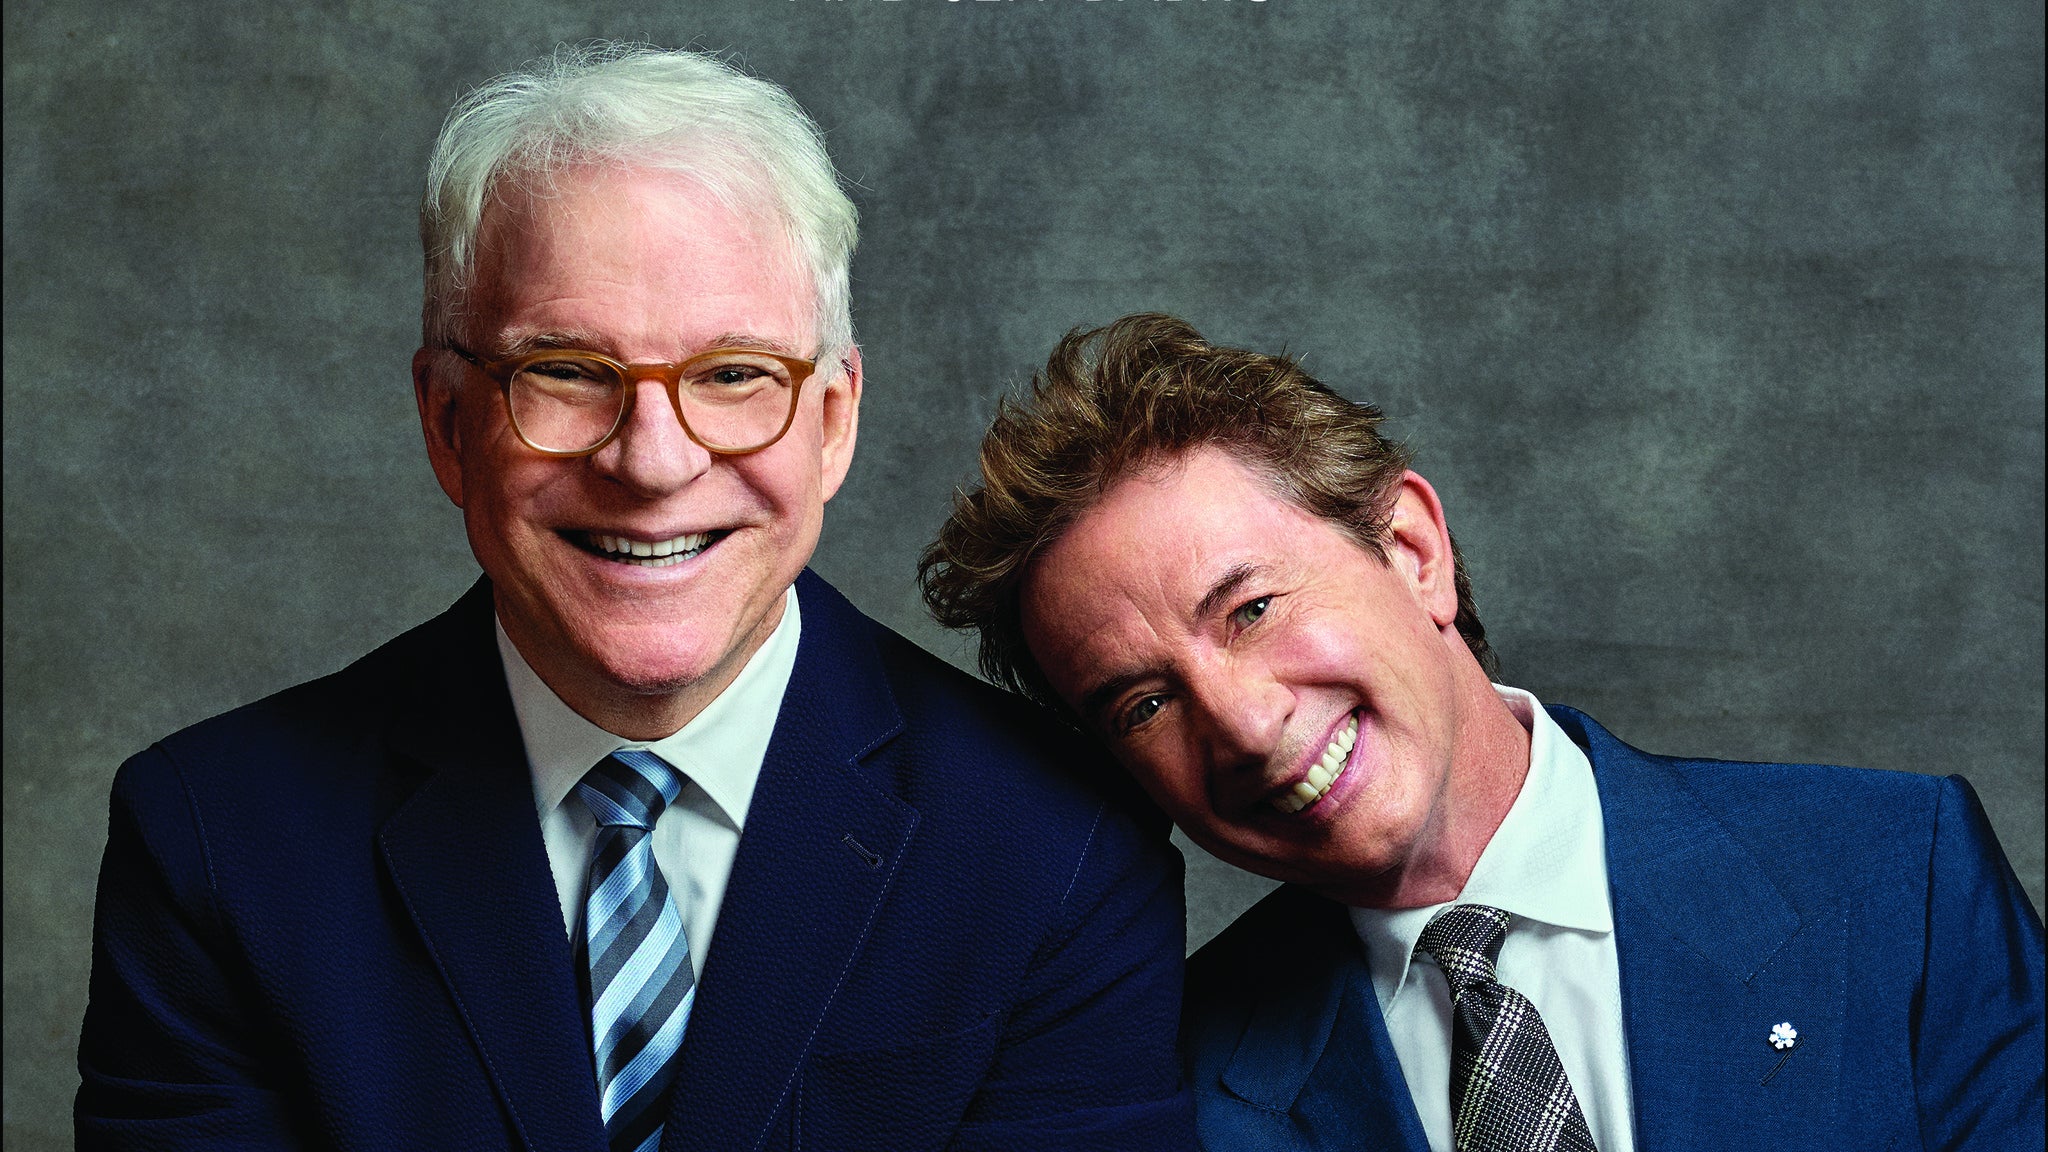 Steve Martin & Martin Short presale password for early tickets in Chattanooga